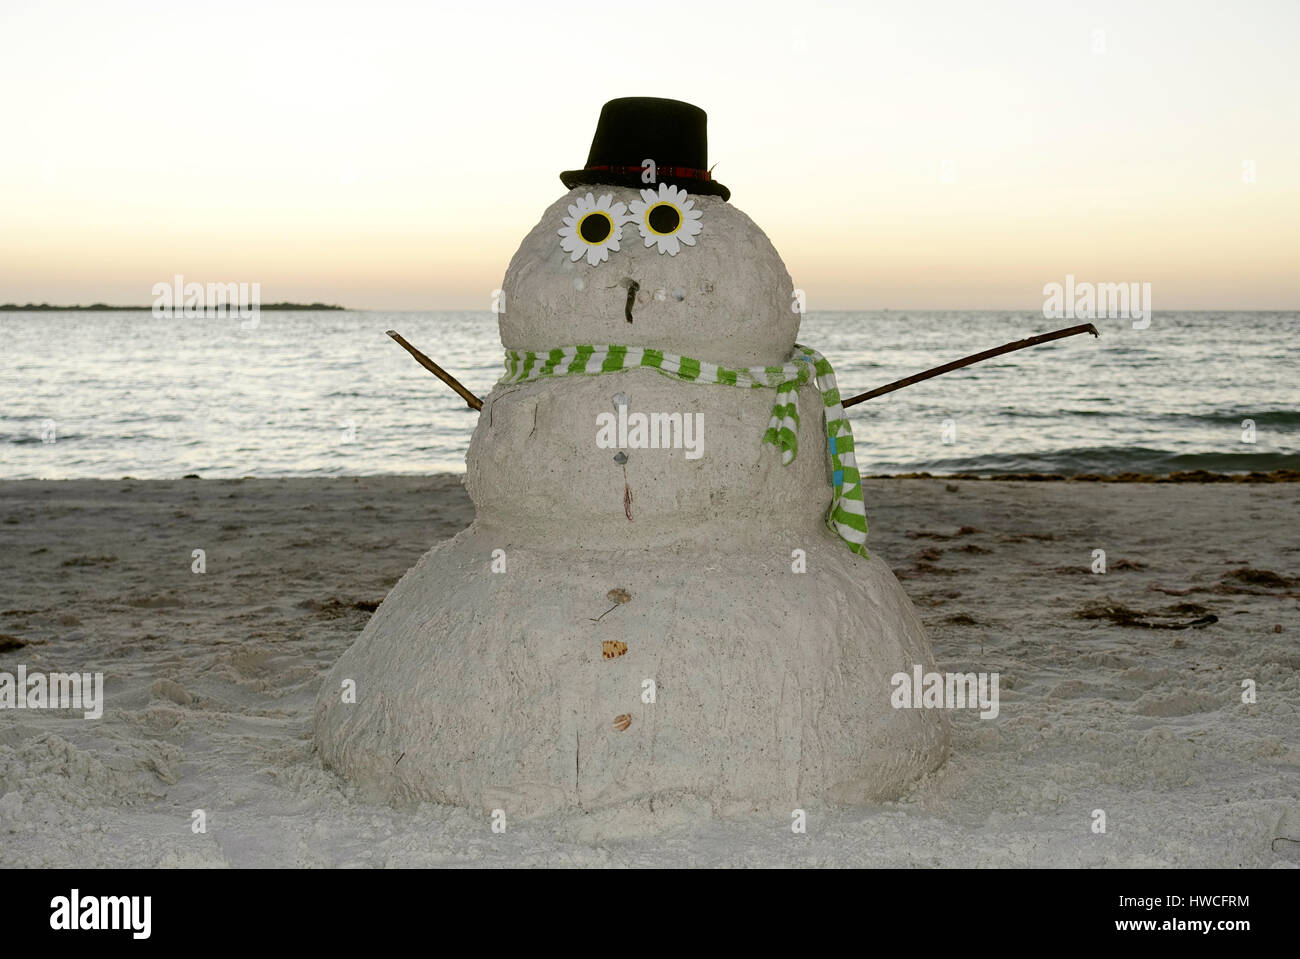 Snowman made of sand on the beach in the evening light, Fort De Soto Park, Florida, USA Stock Photo